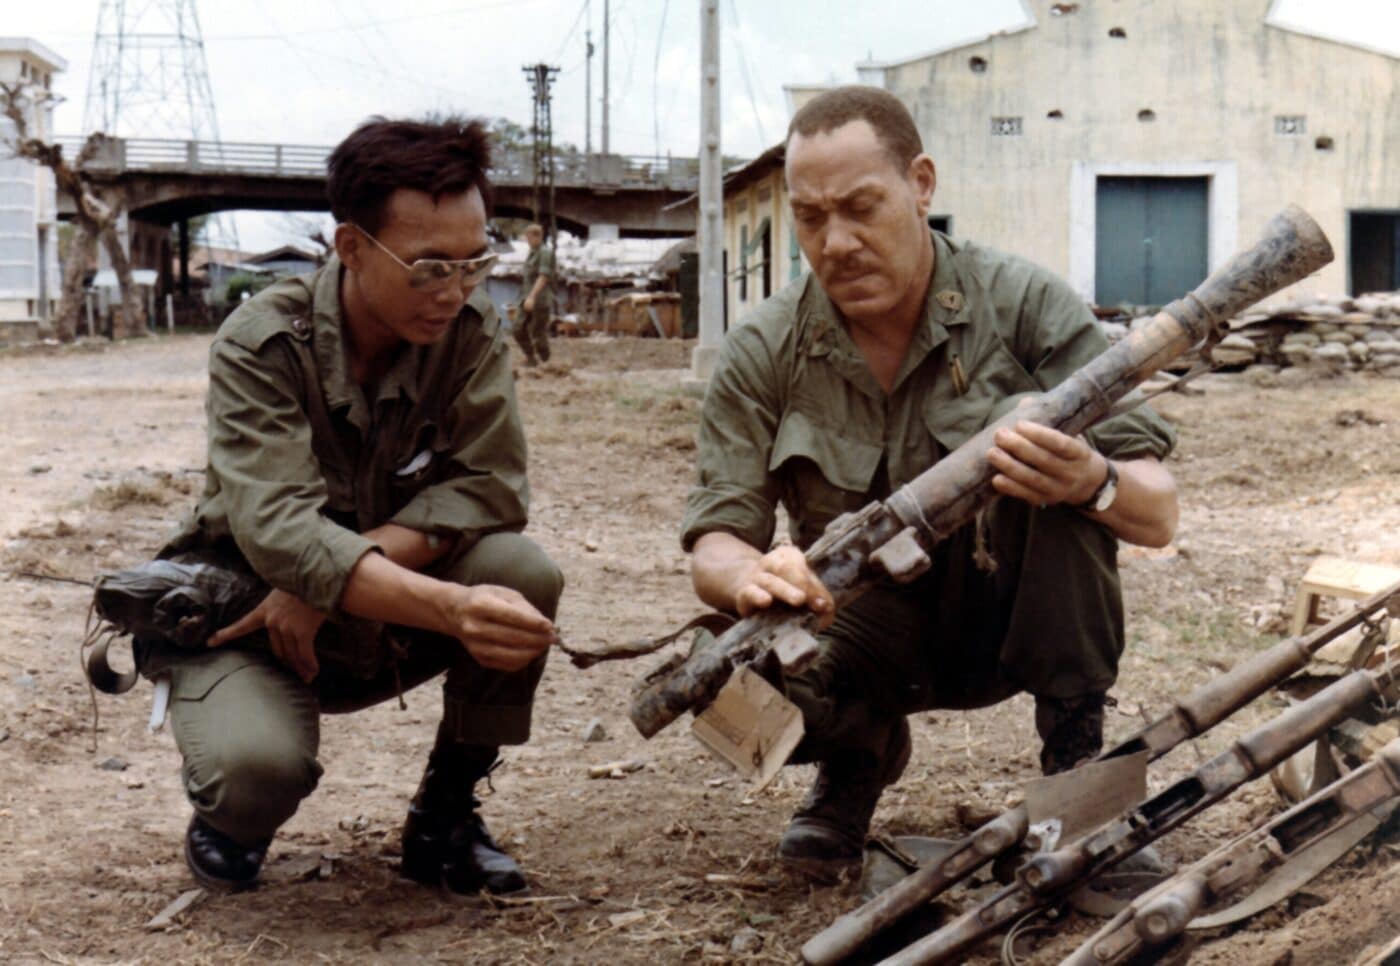 Soldiers examine RPG-7 during Tet offensive